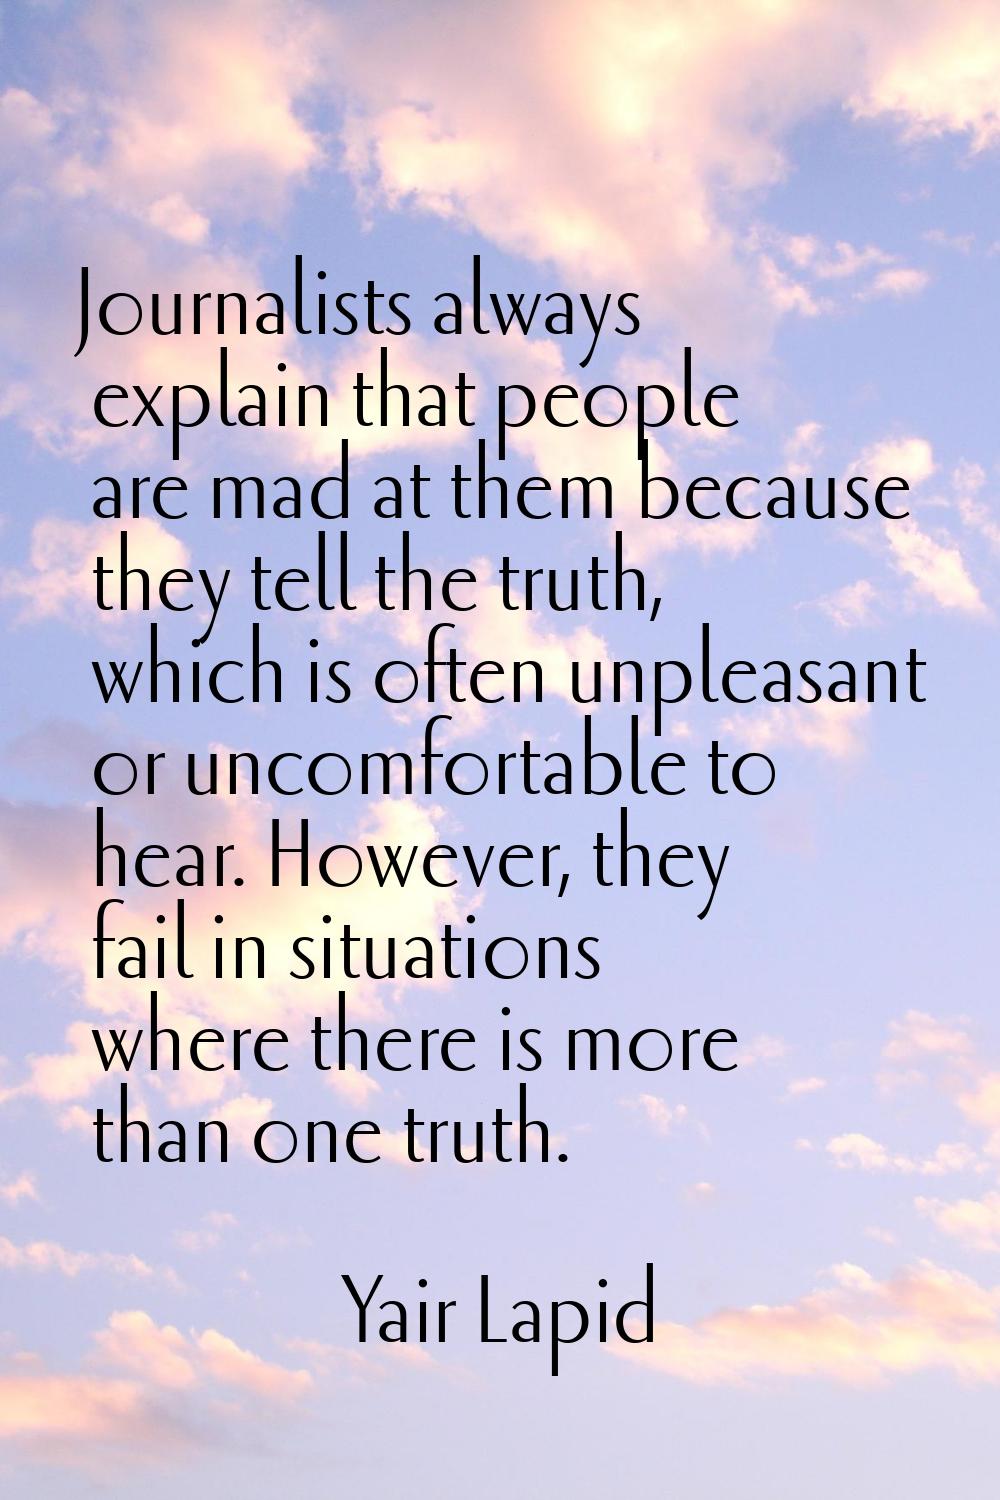 Journalists always explain that people are mad at them because they tell the truth, which is often 